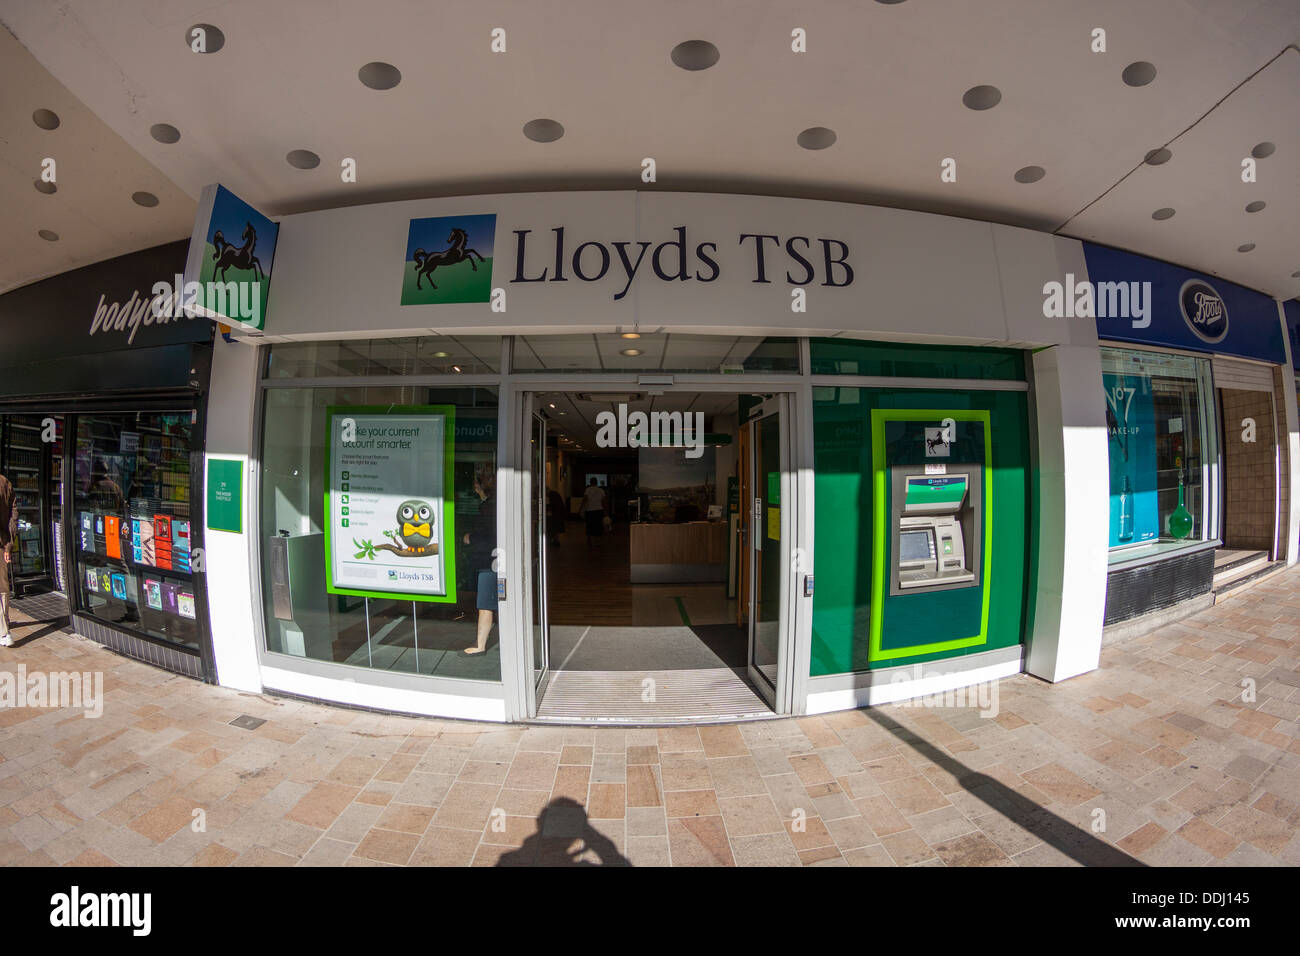 Lloyds Bank Tsb High Resolution Stock Photography and Images - Alamy